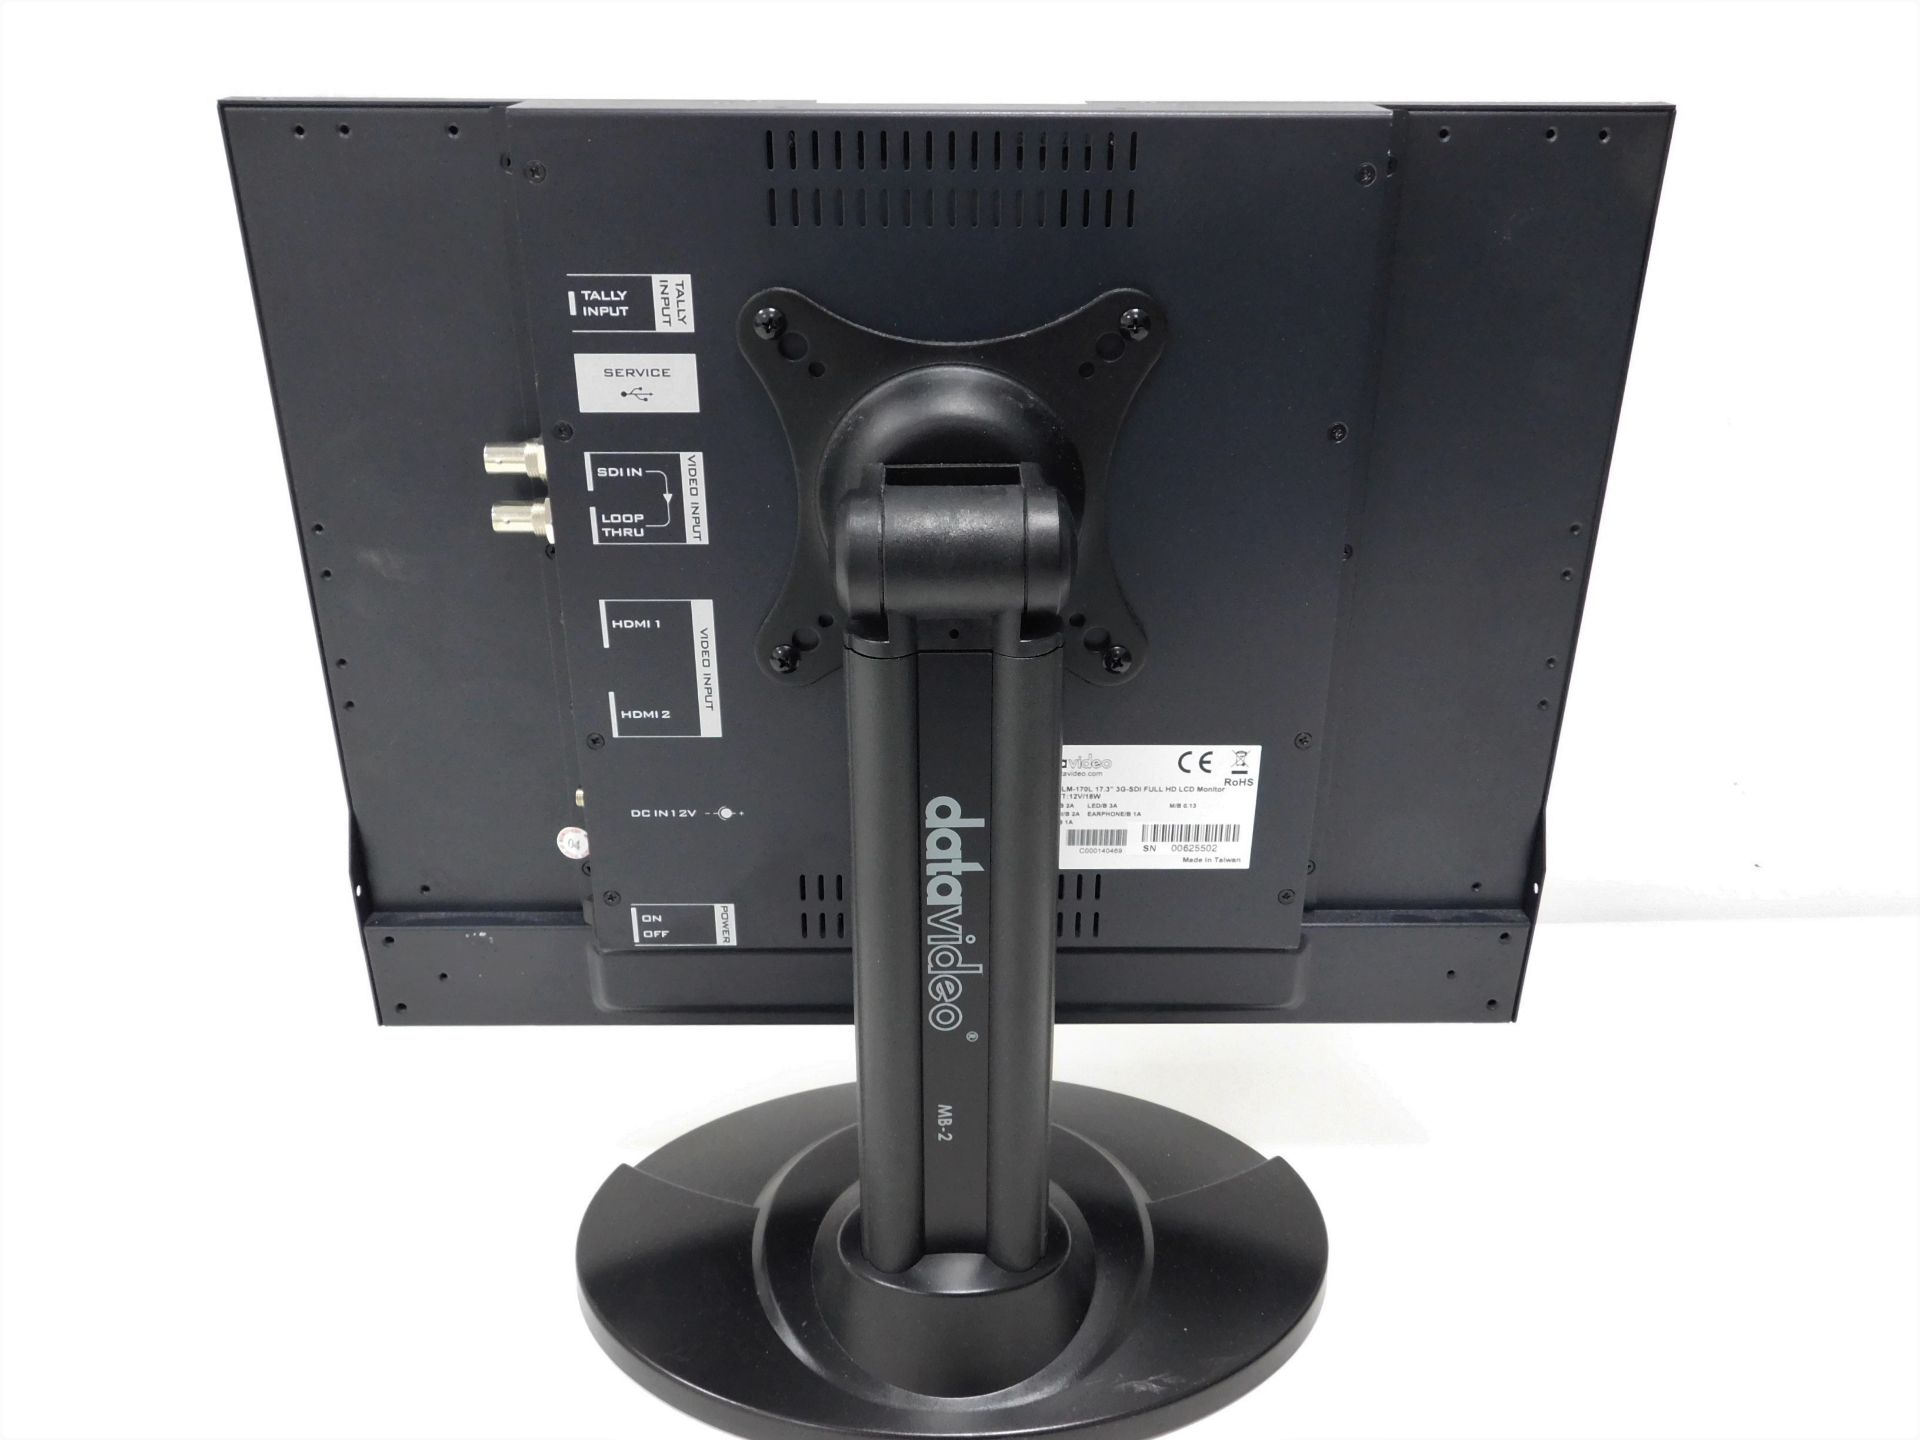 Datavideo TLM-170L 17.3" Full HD LCD Monitor (Location: Westminster. Please Refer to General Notes) - Image 2 of 3